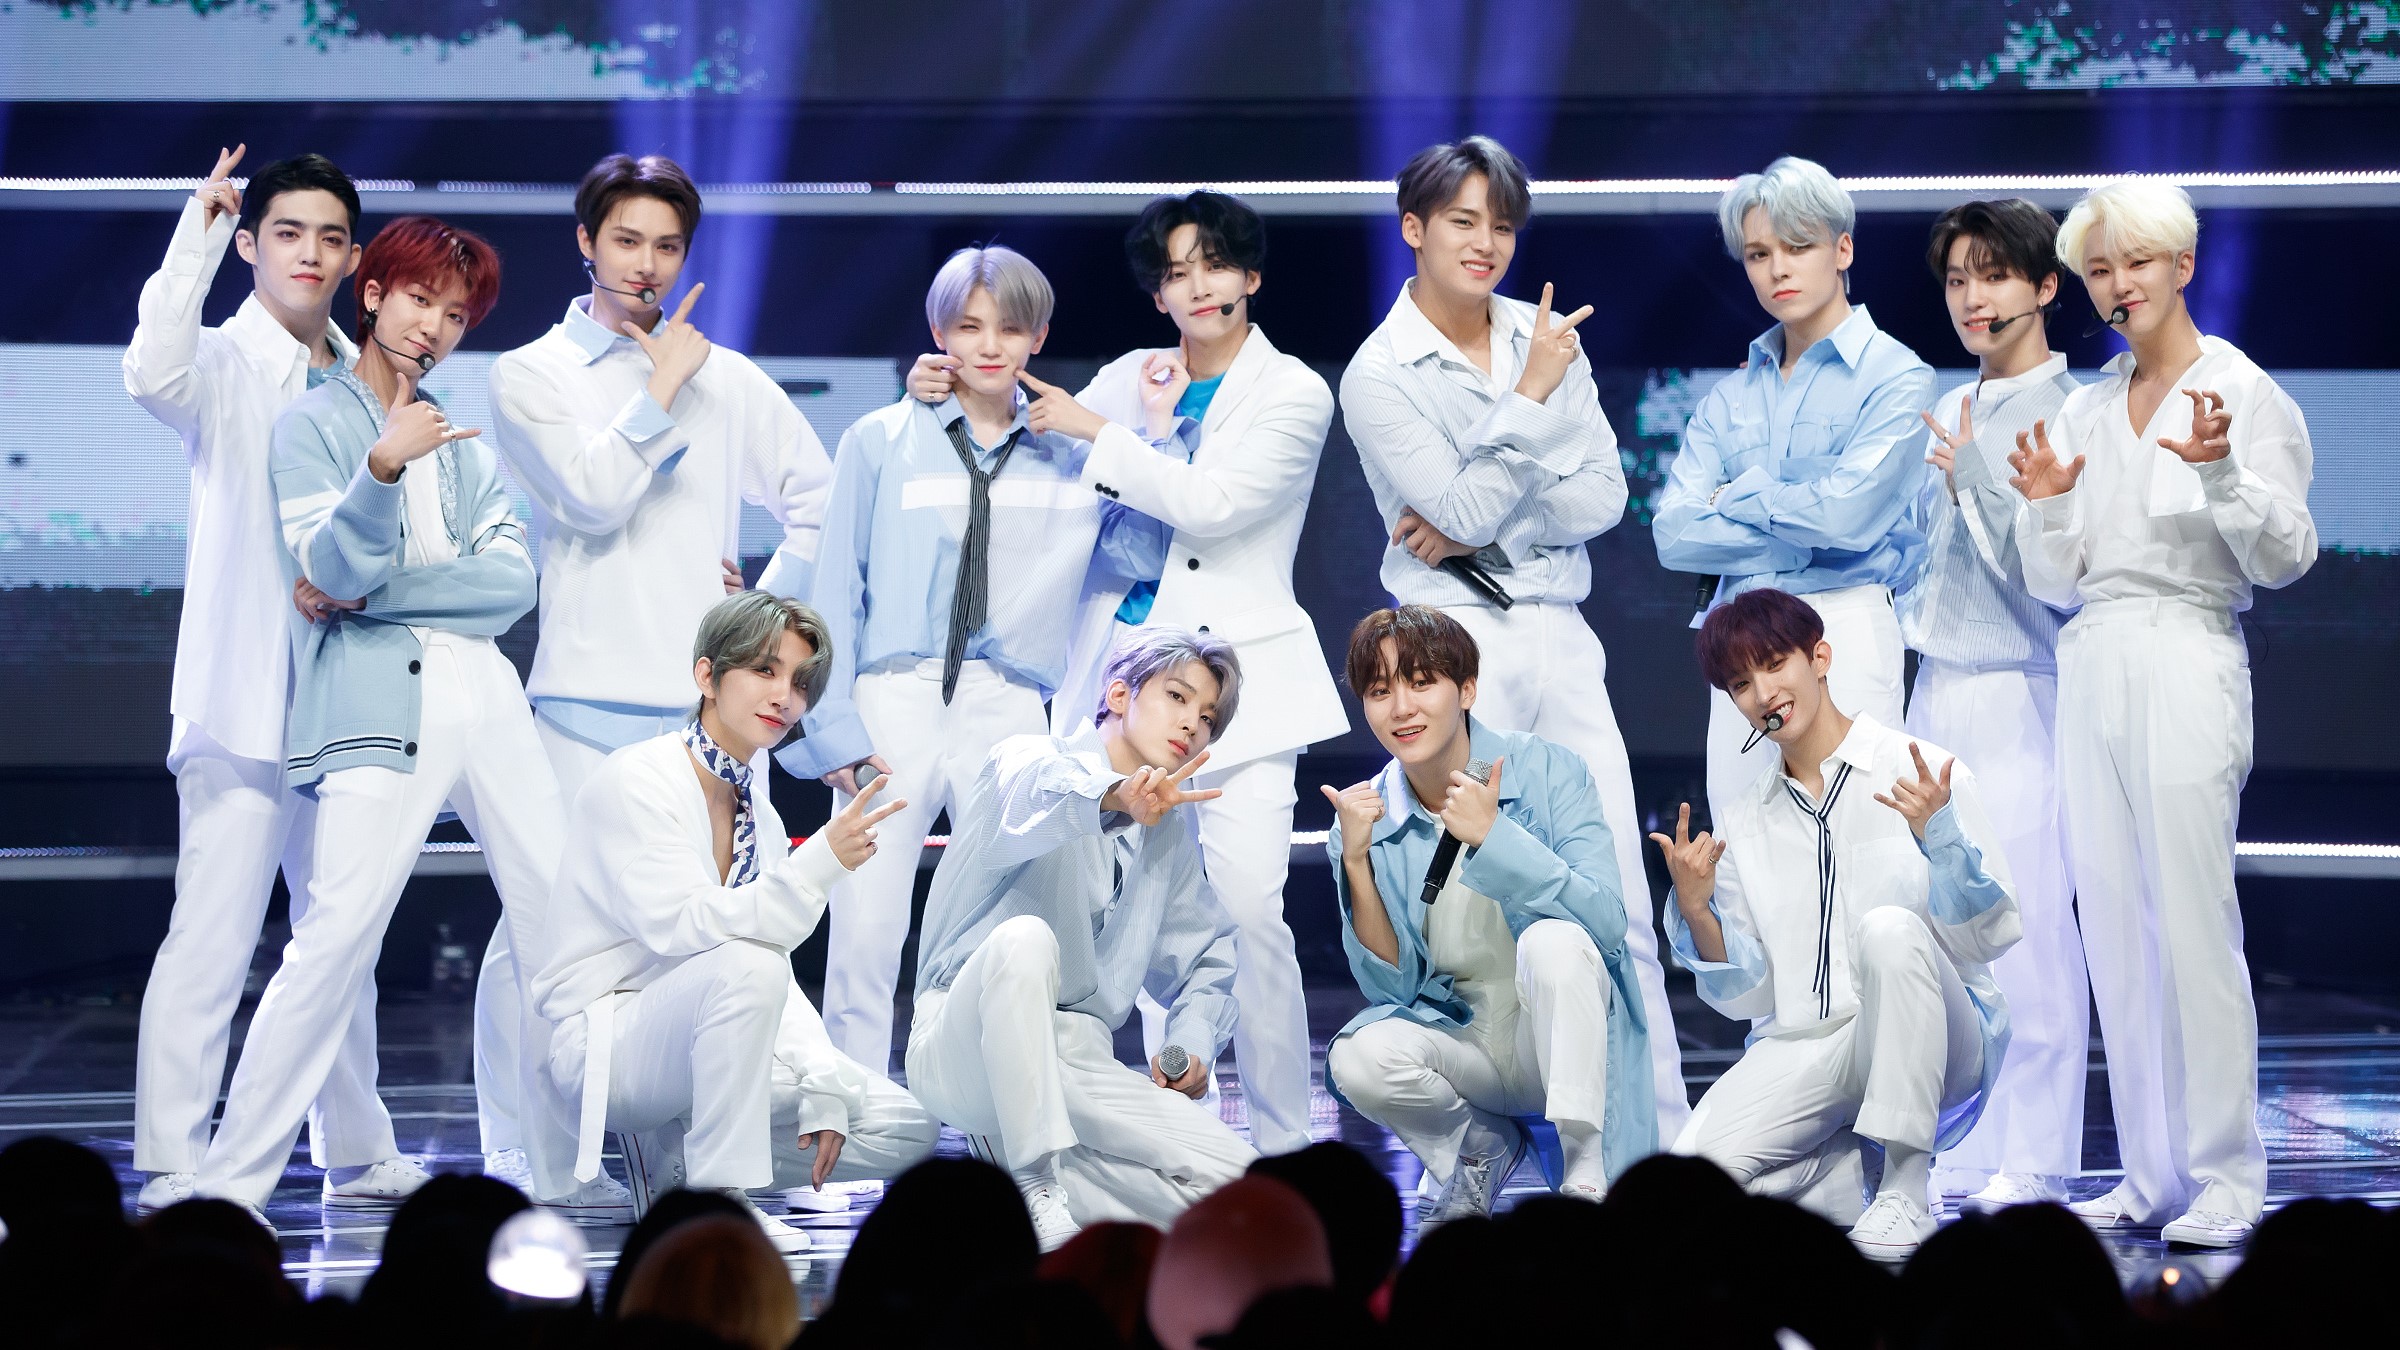 HD desktop wallpaper featuring the K-pop group Seventeen in coordinating white outfits, posing on stage for a lively performance, perfect for a vibrant desktop background.